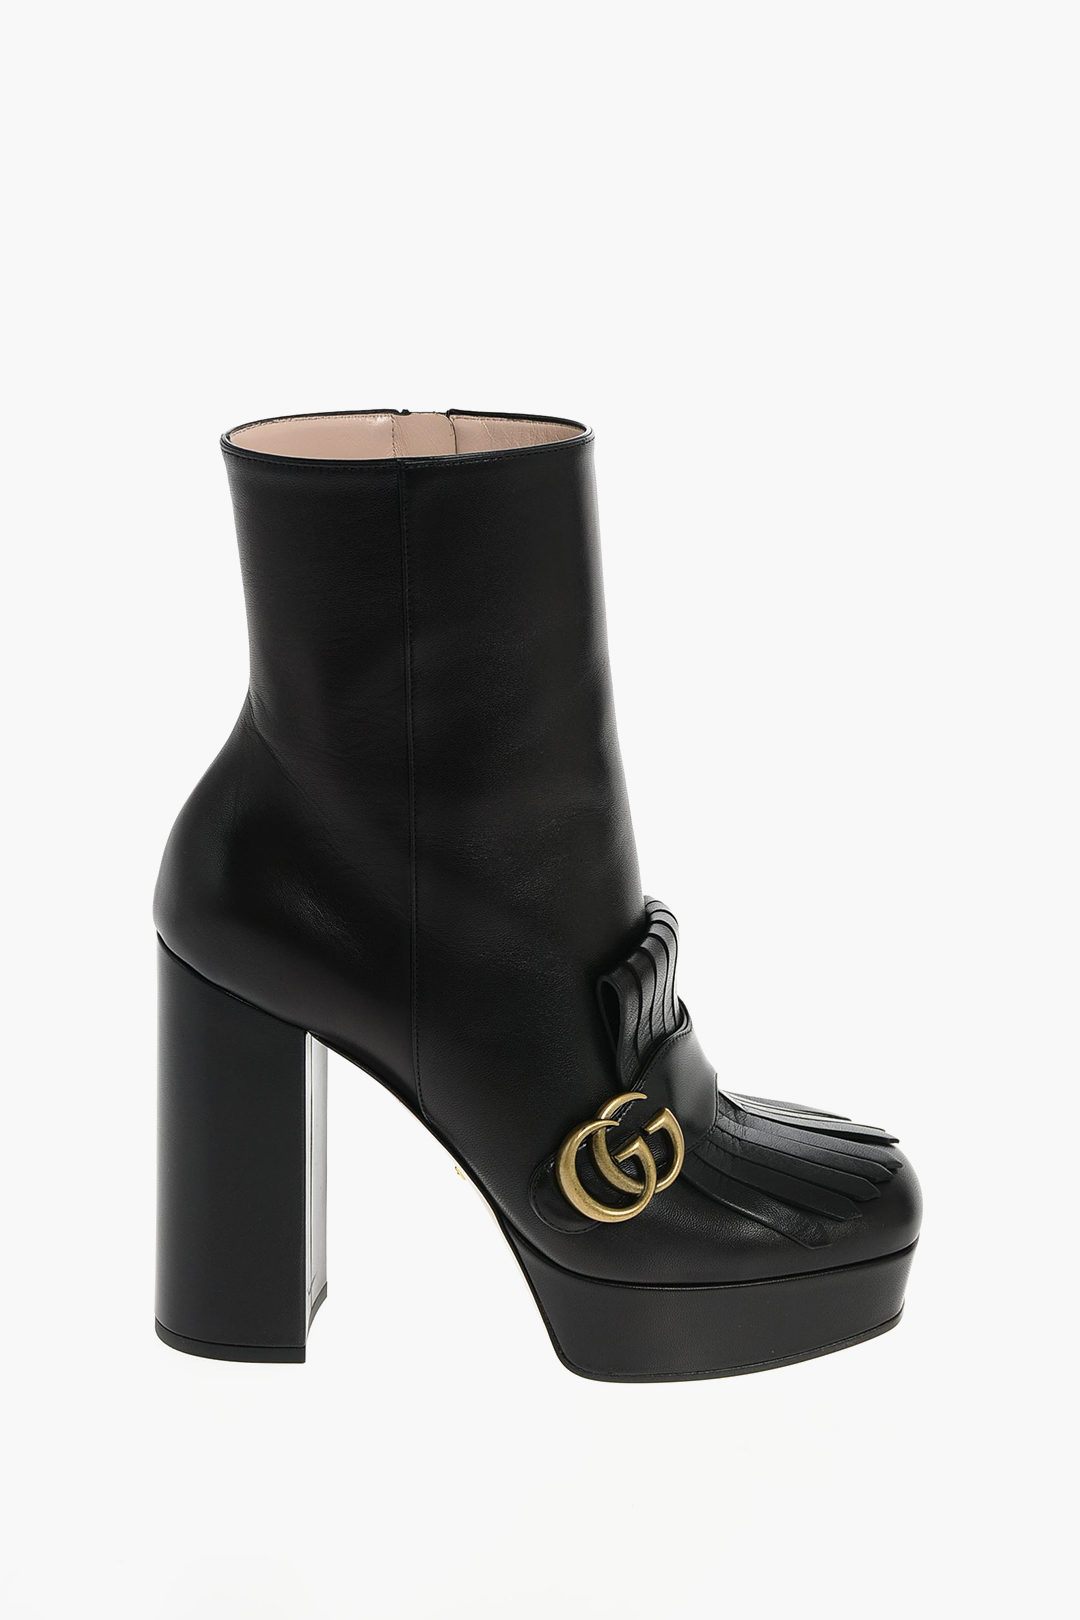 Gucci Chunky High Heel ankle boots with Fringes 13 cm women - Glamood Outlet